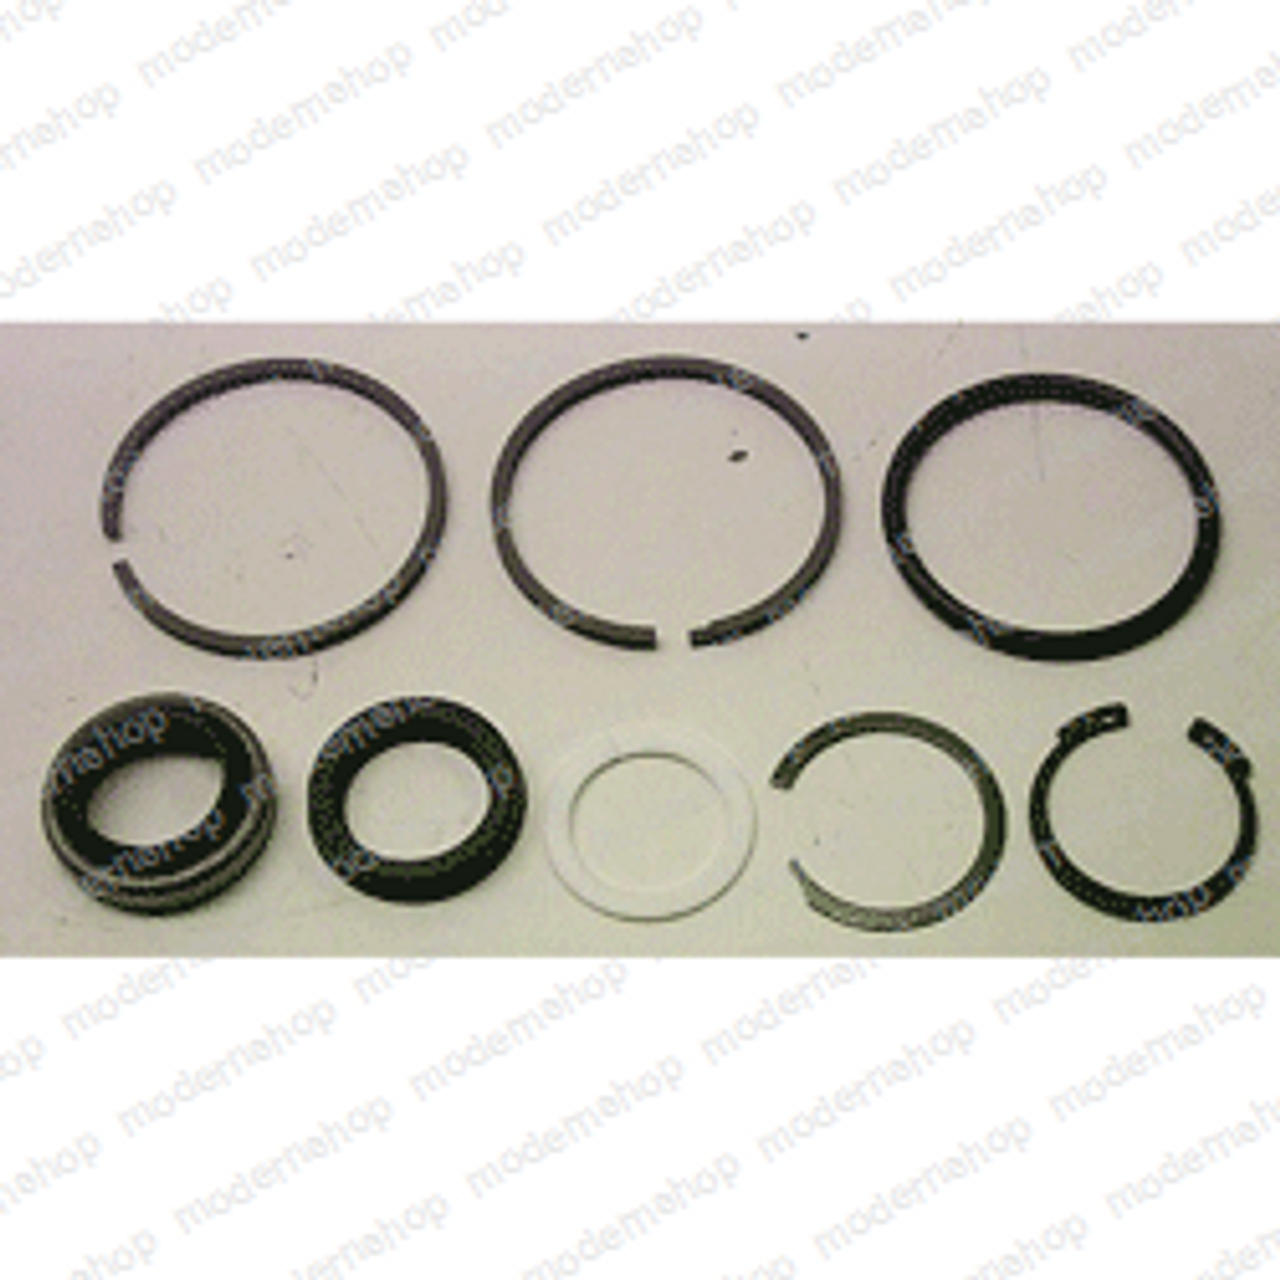 33168: E-Parts SEAL KIT -  POWER STEERING